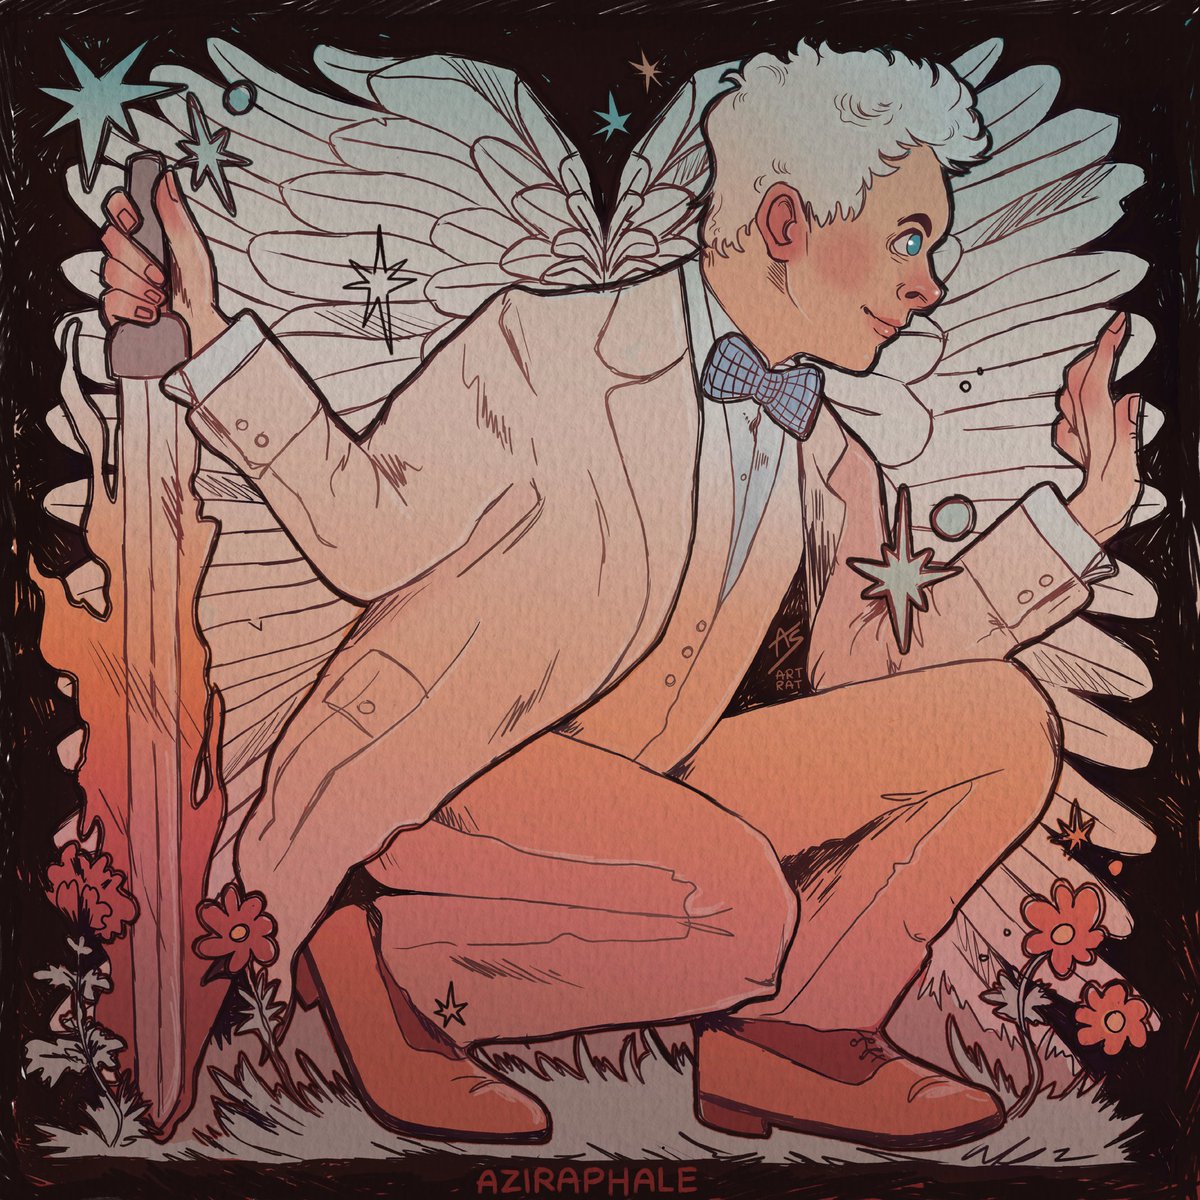 Your favourite angel, Aziraphale <3 (in honour of us possibly finally getting Good Omens 2)
.
@GoodOmensPrime @michaelsheen  #GoodOmens